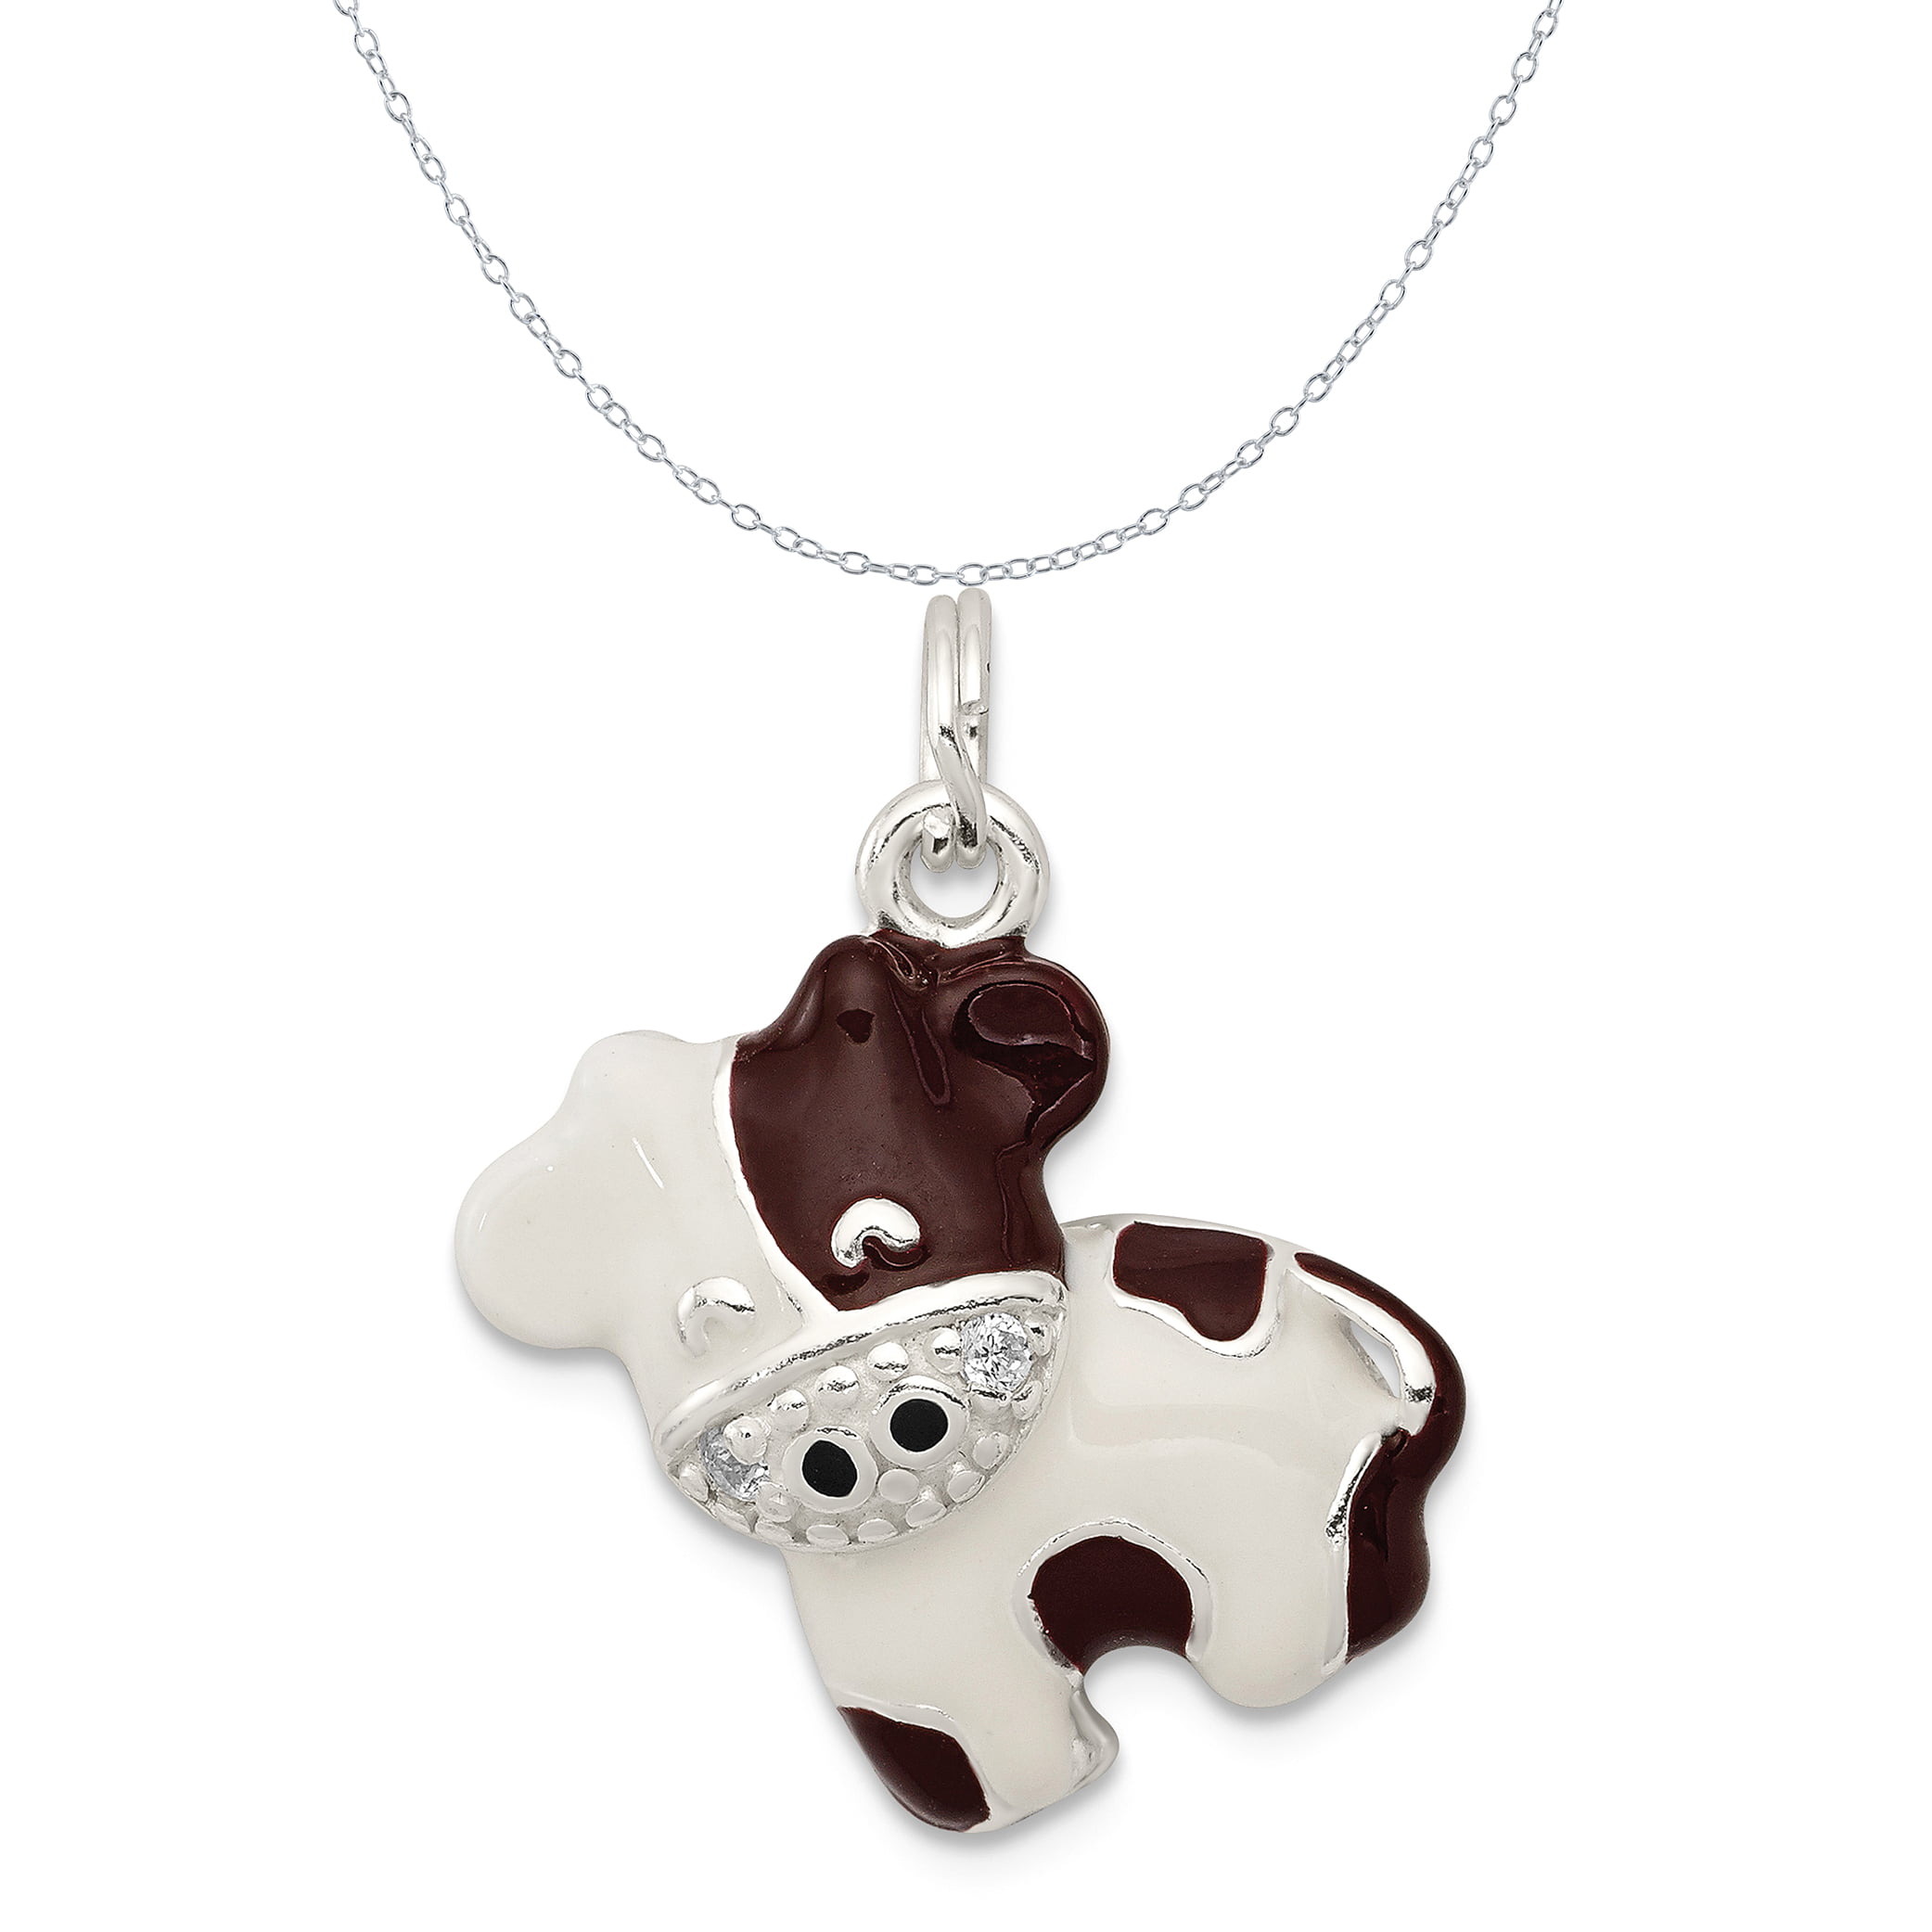 17mm x 14mm Solid 925 Sterling Silver Pendant Enameled Cow Charm